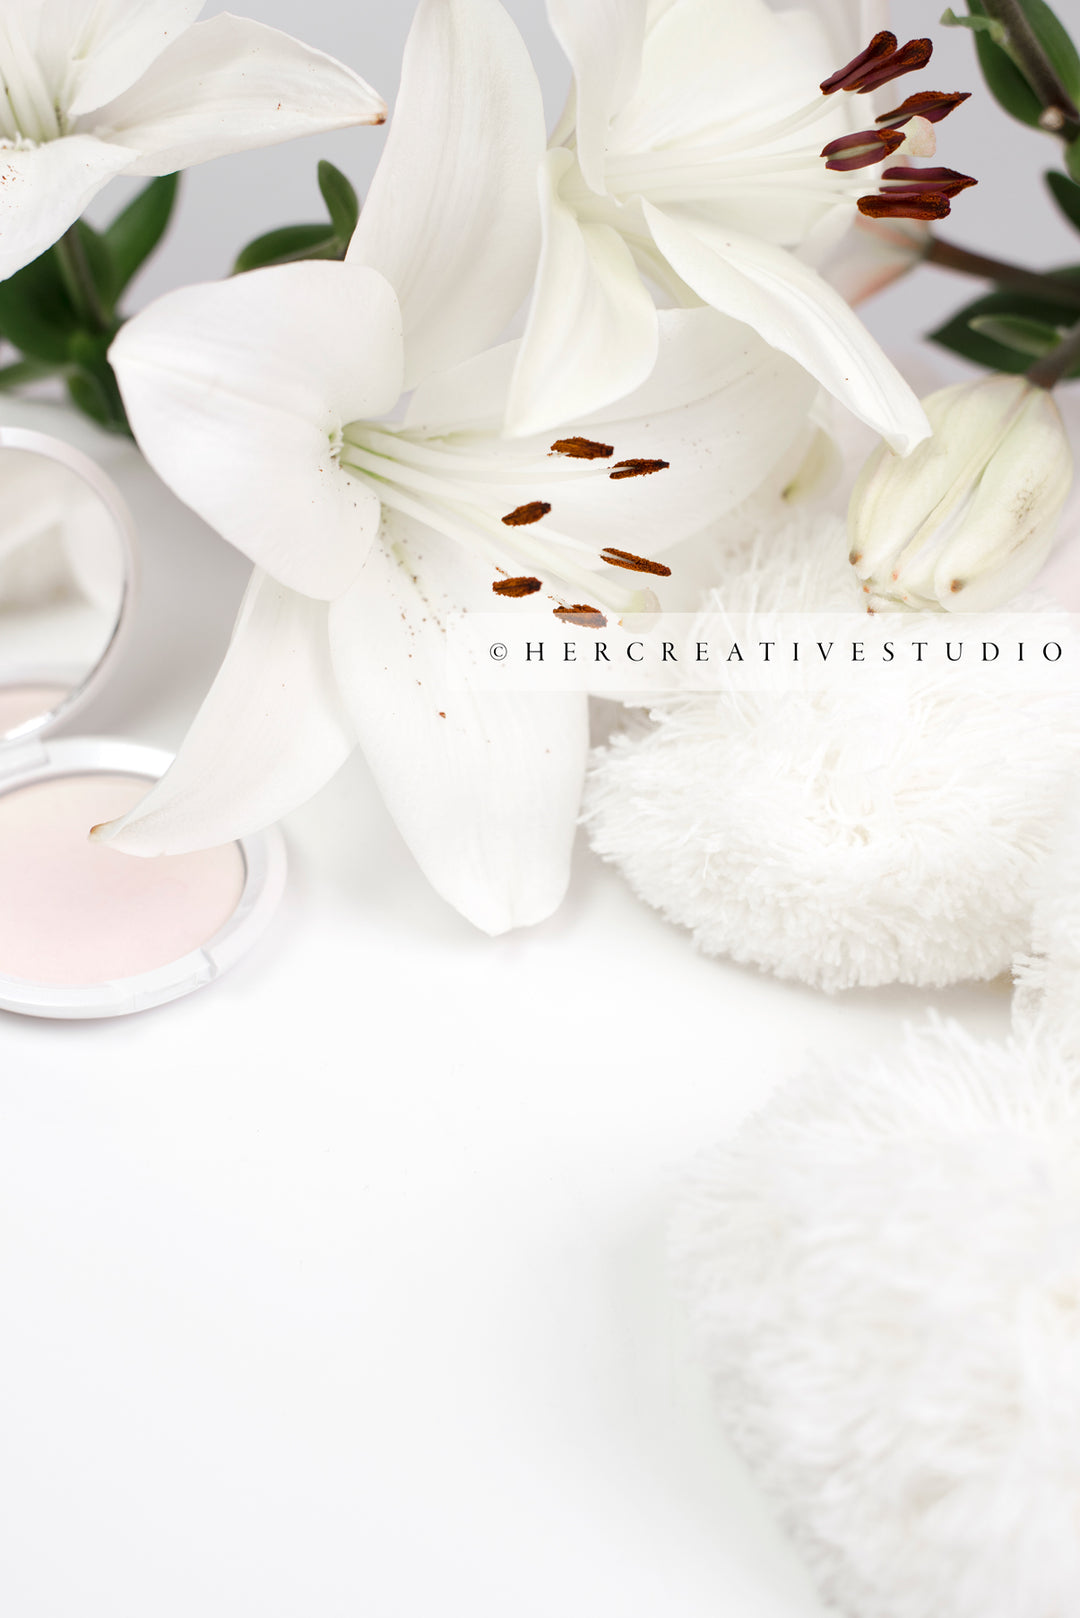 Lillies & Makeup on White Tabletop, Styled Stock